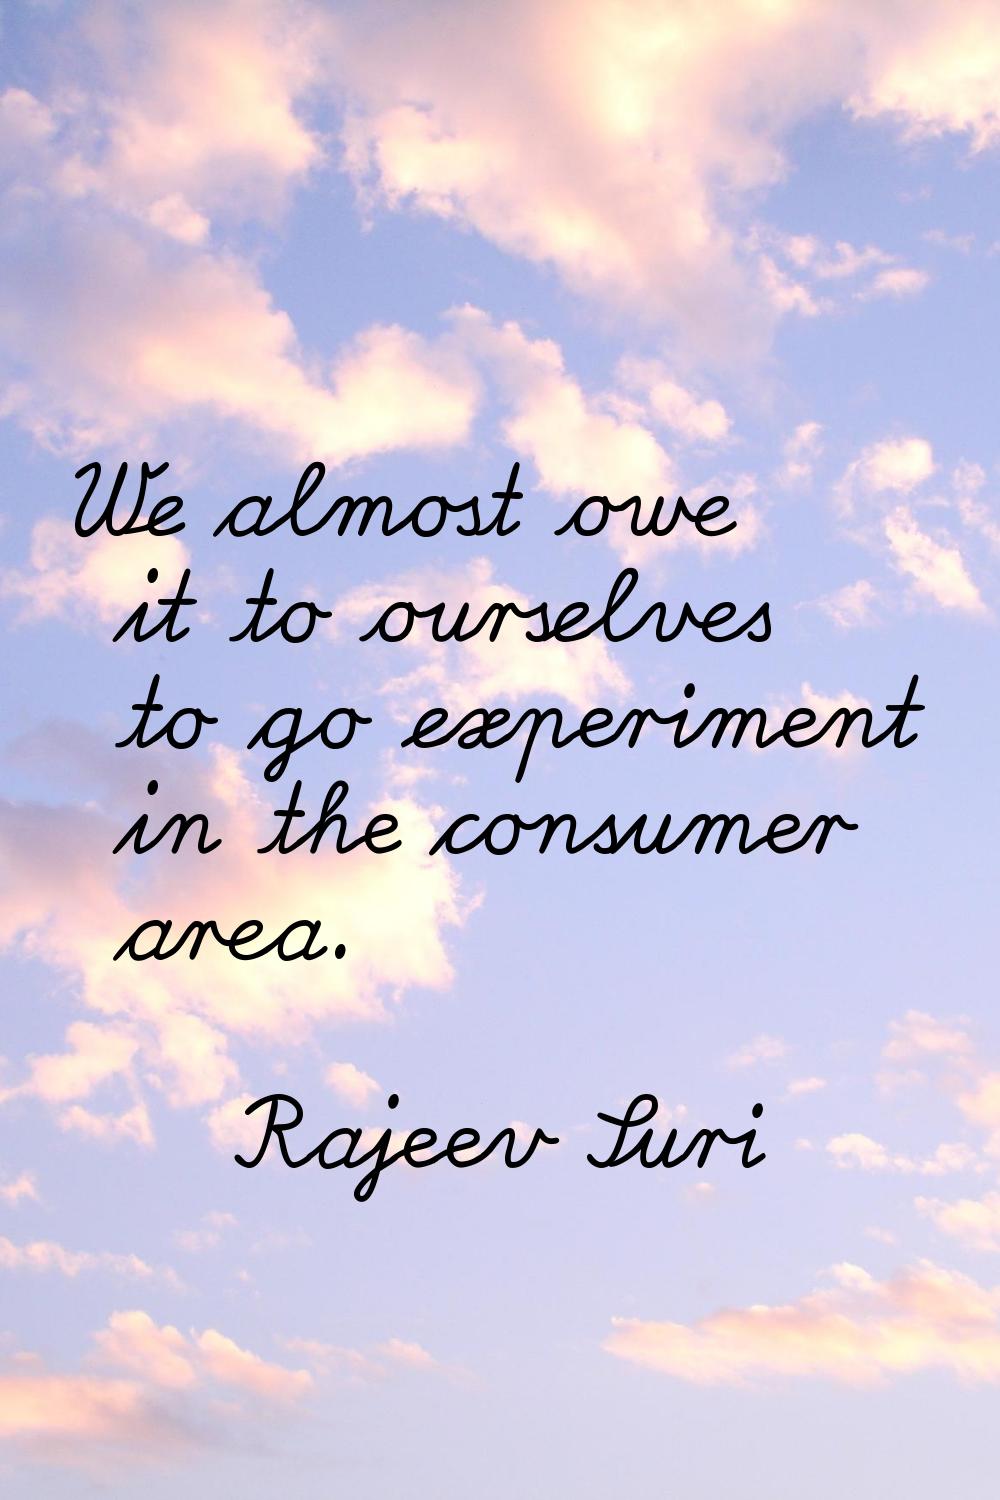 We almost owe it to ourselves to go experiment in the consumer area.